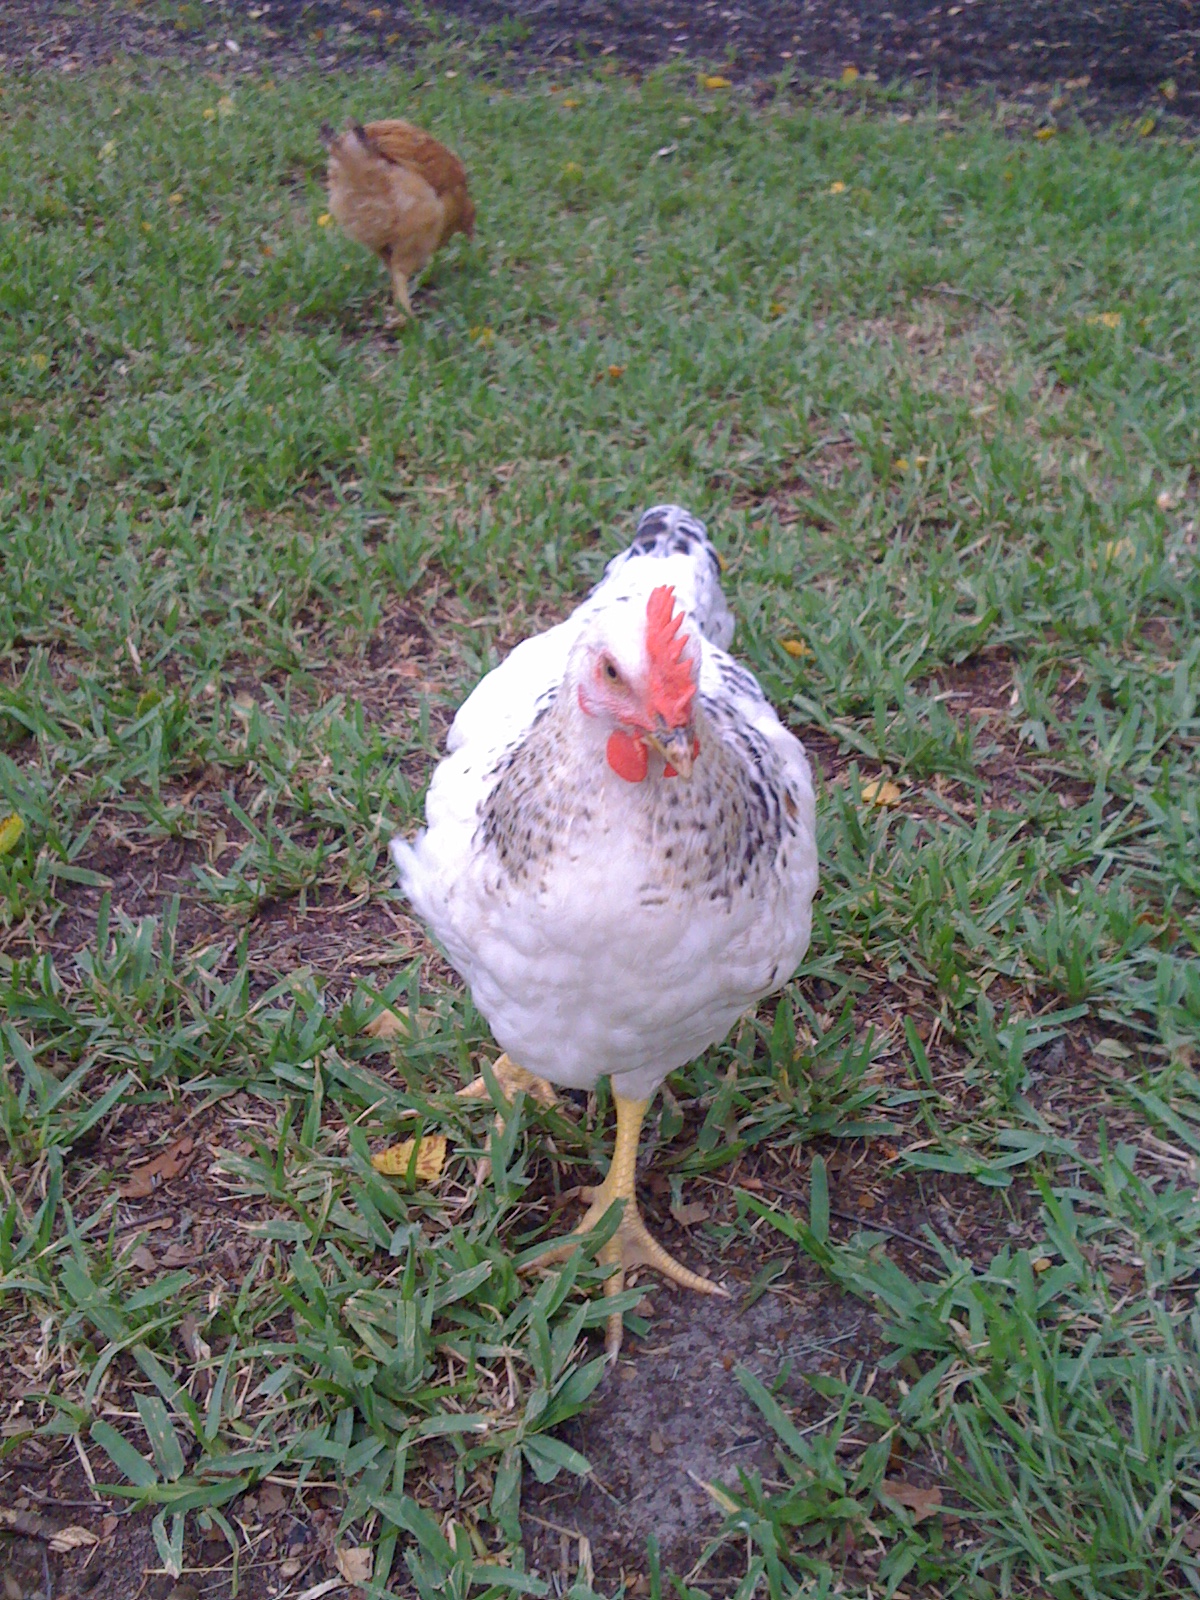 He/She is so pretty and incredibly sweet if it's a cockerel. Please tell me IT is a SHE!!